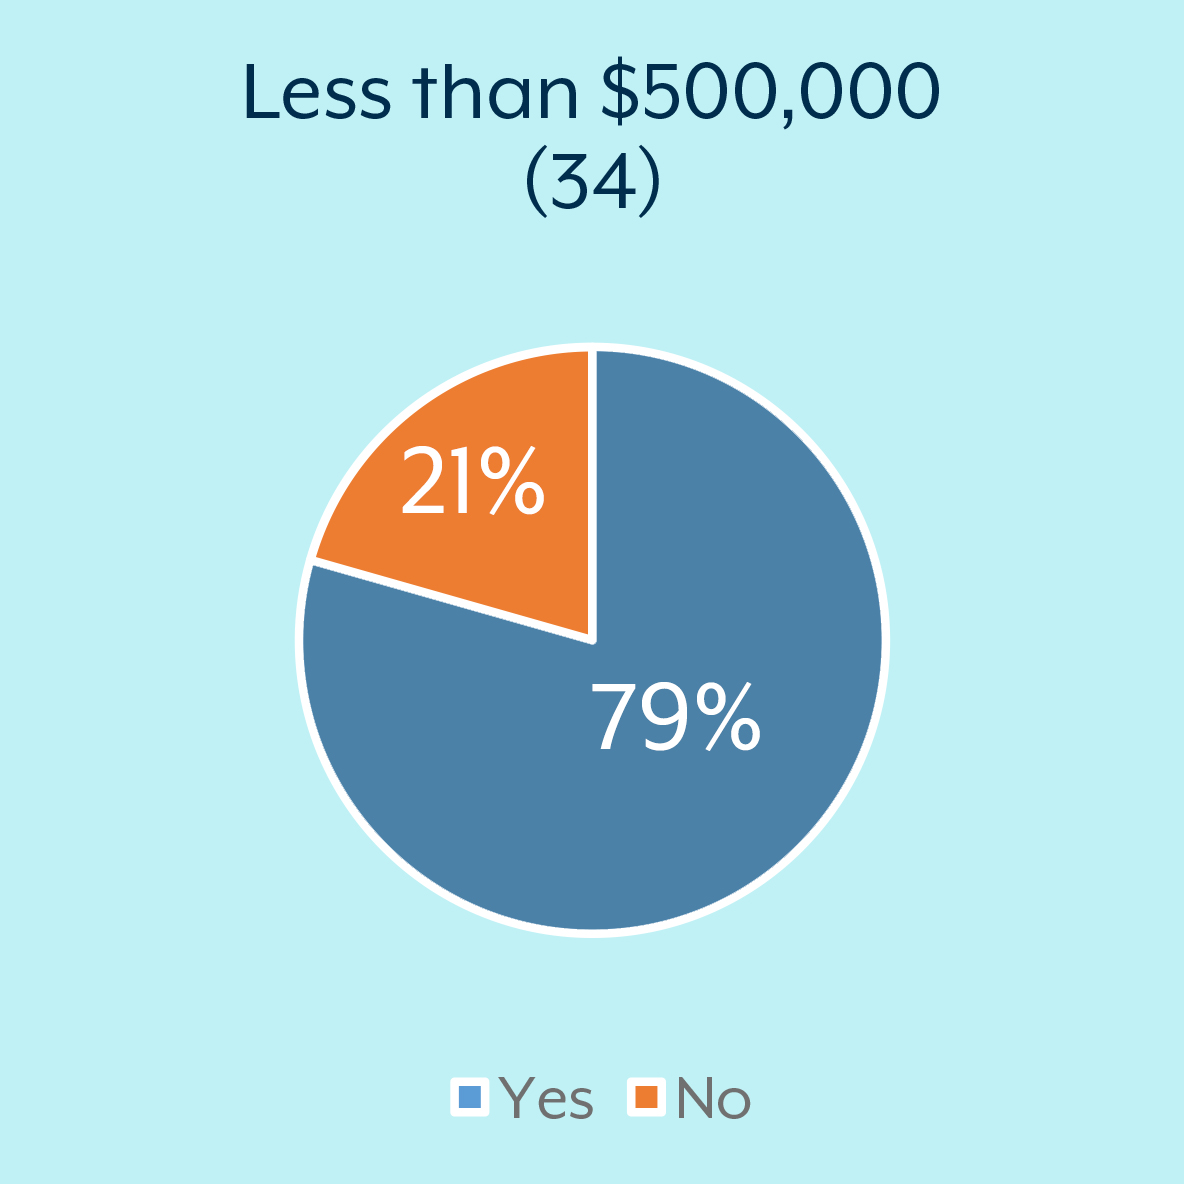 Less than $500,000: Yes = 79% No = 21%